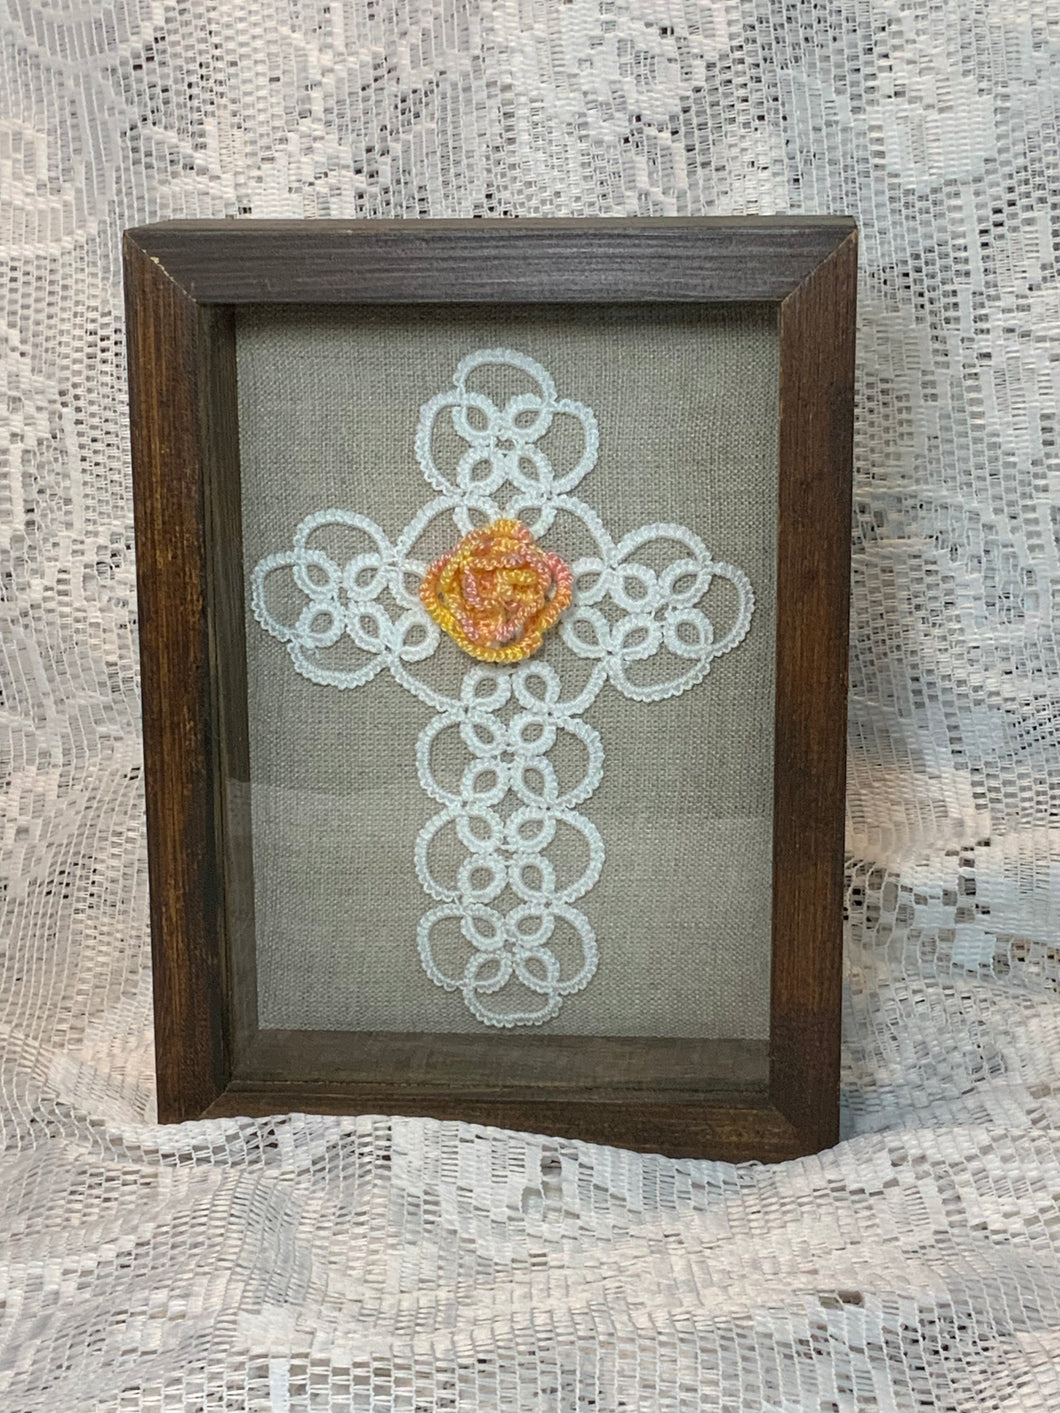 Shuttle Tatted Detailed Cross with Rose Center